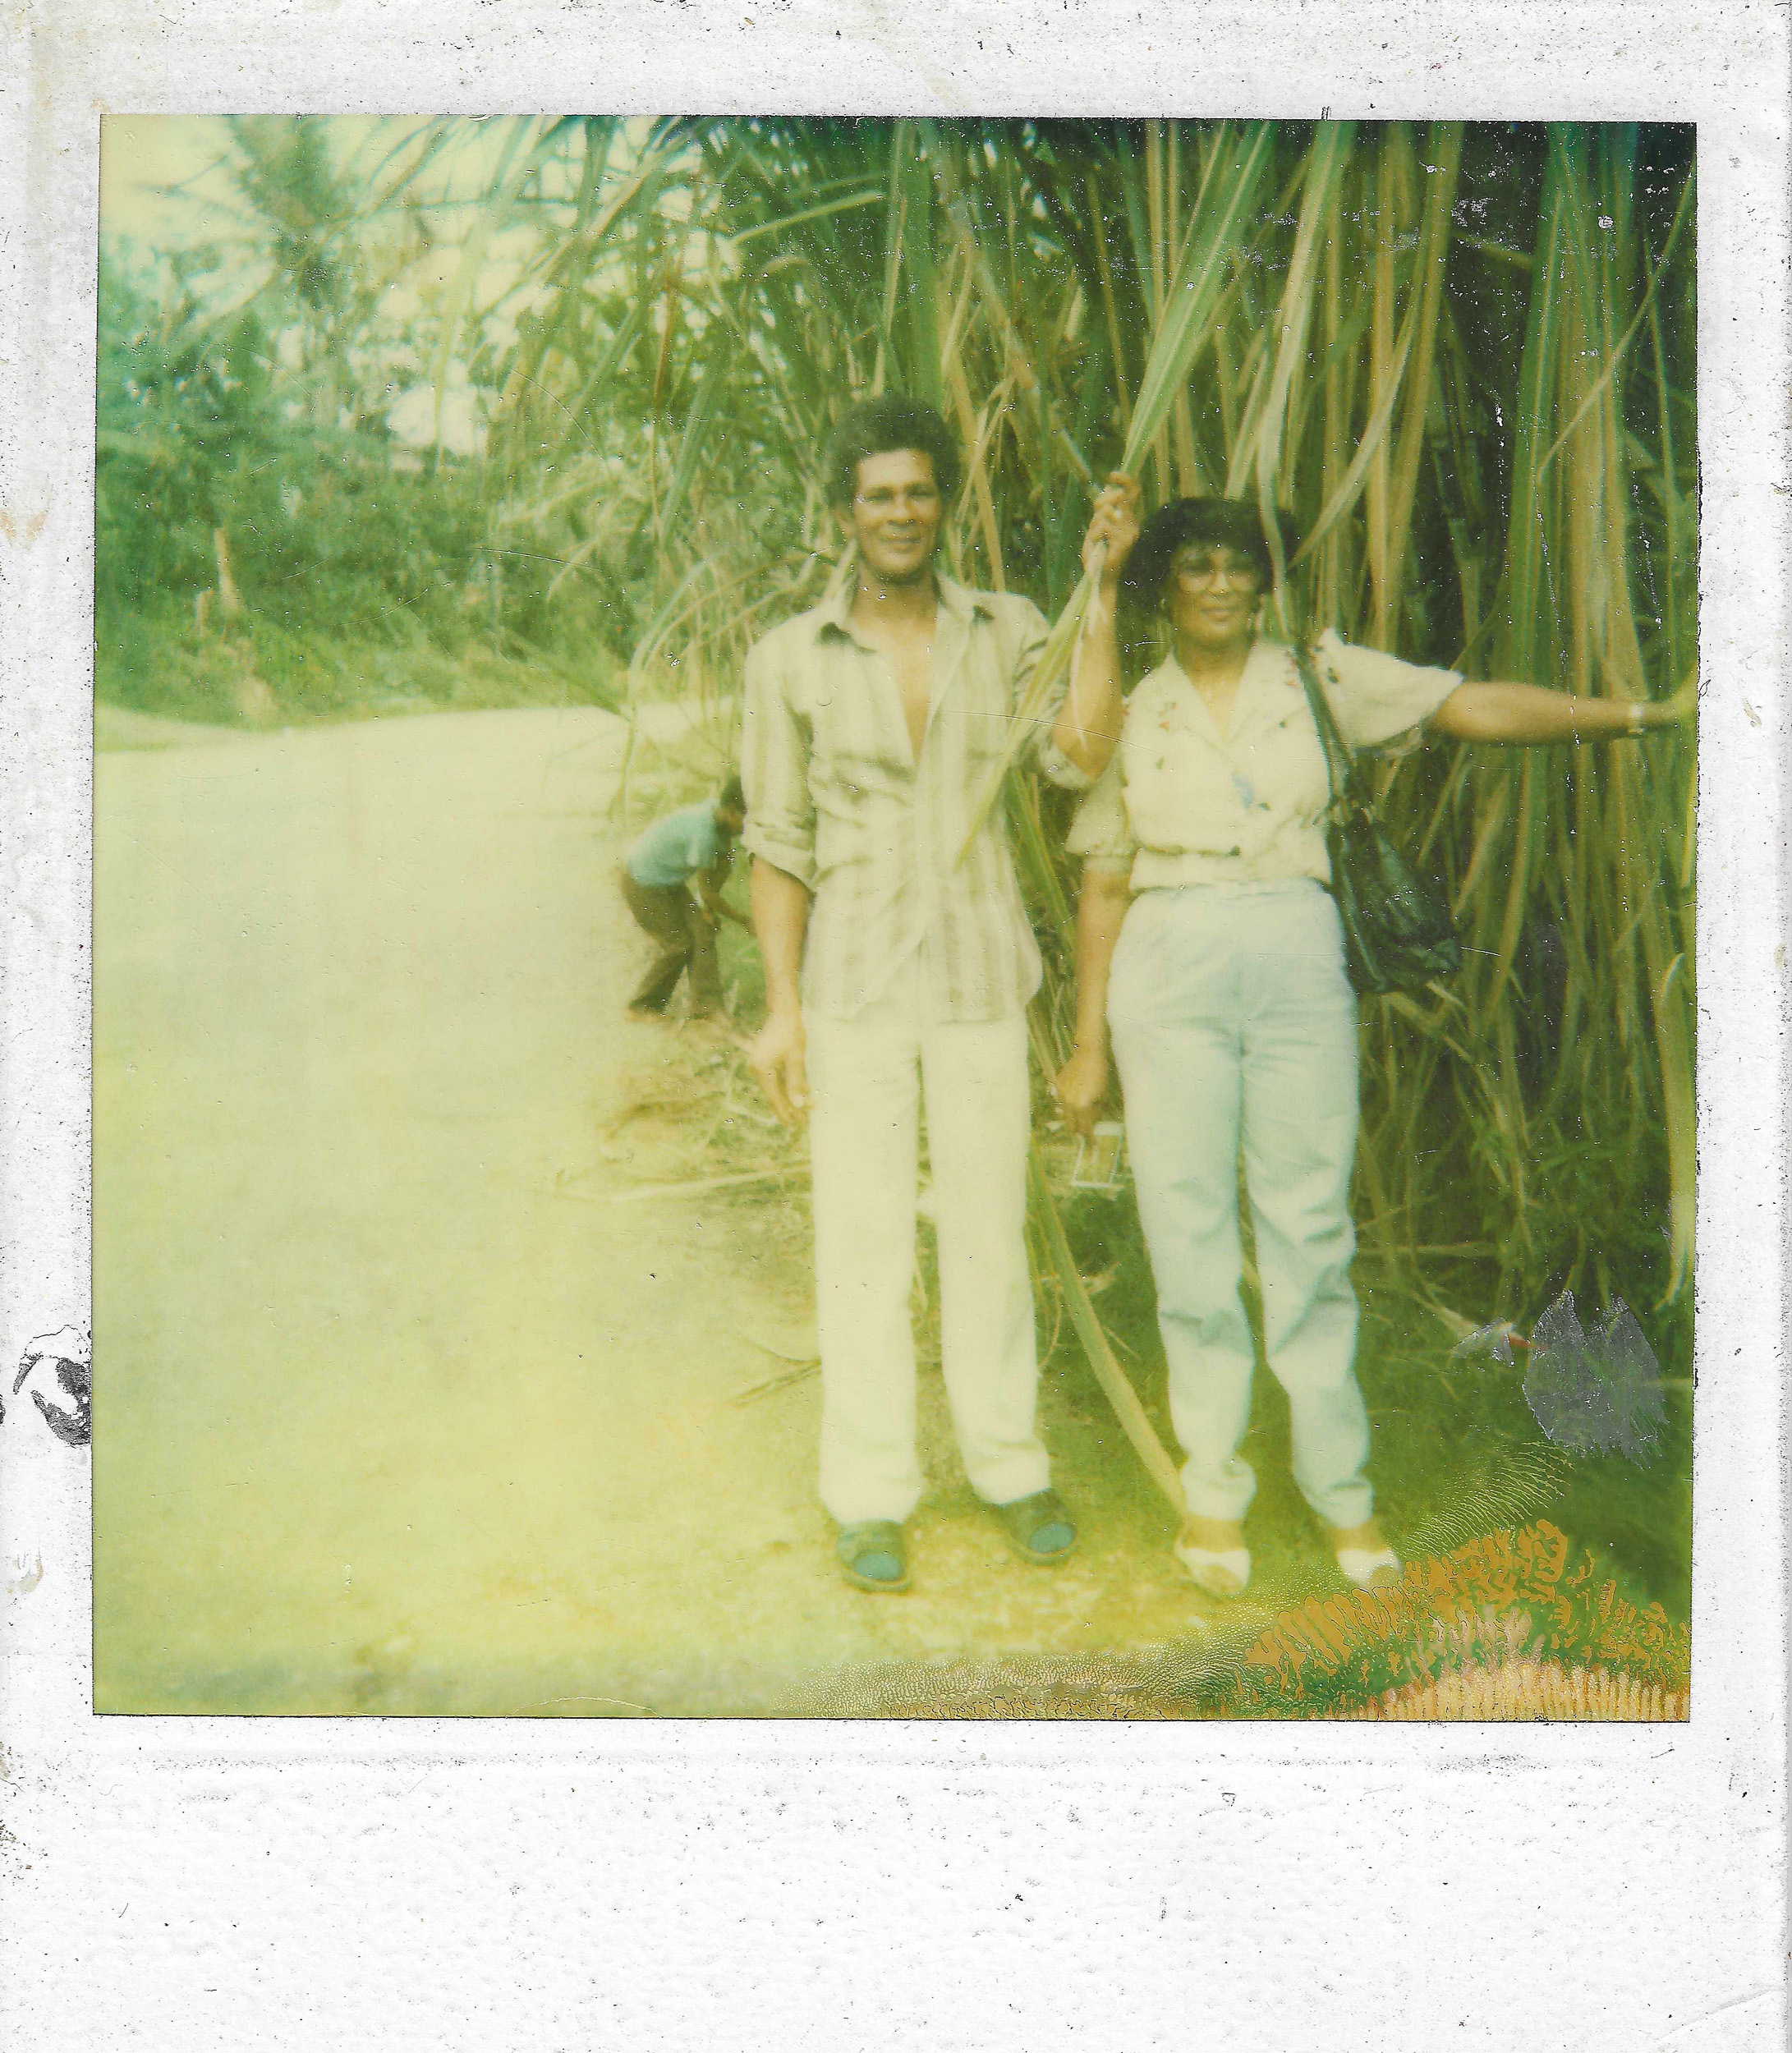 Man and woman standing in sugarcane field.